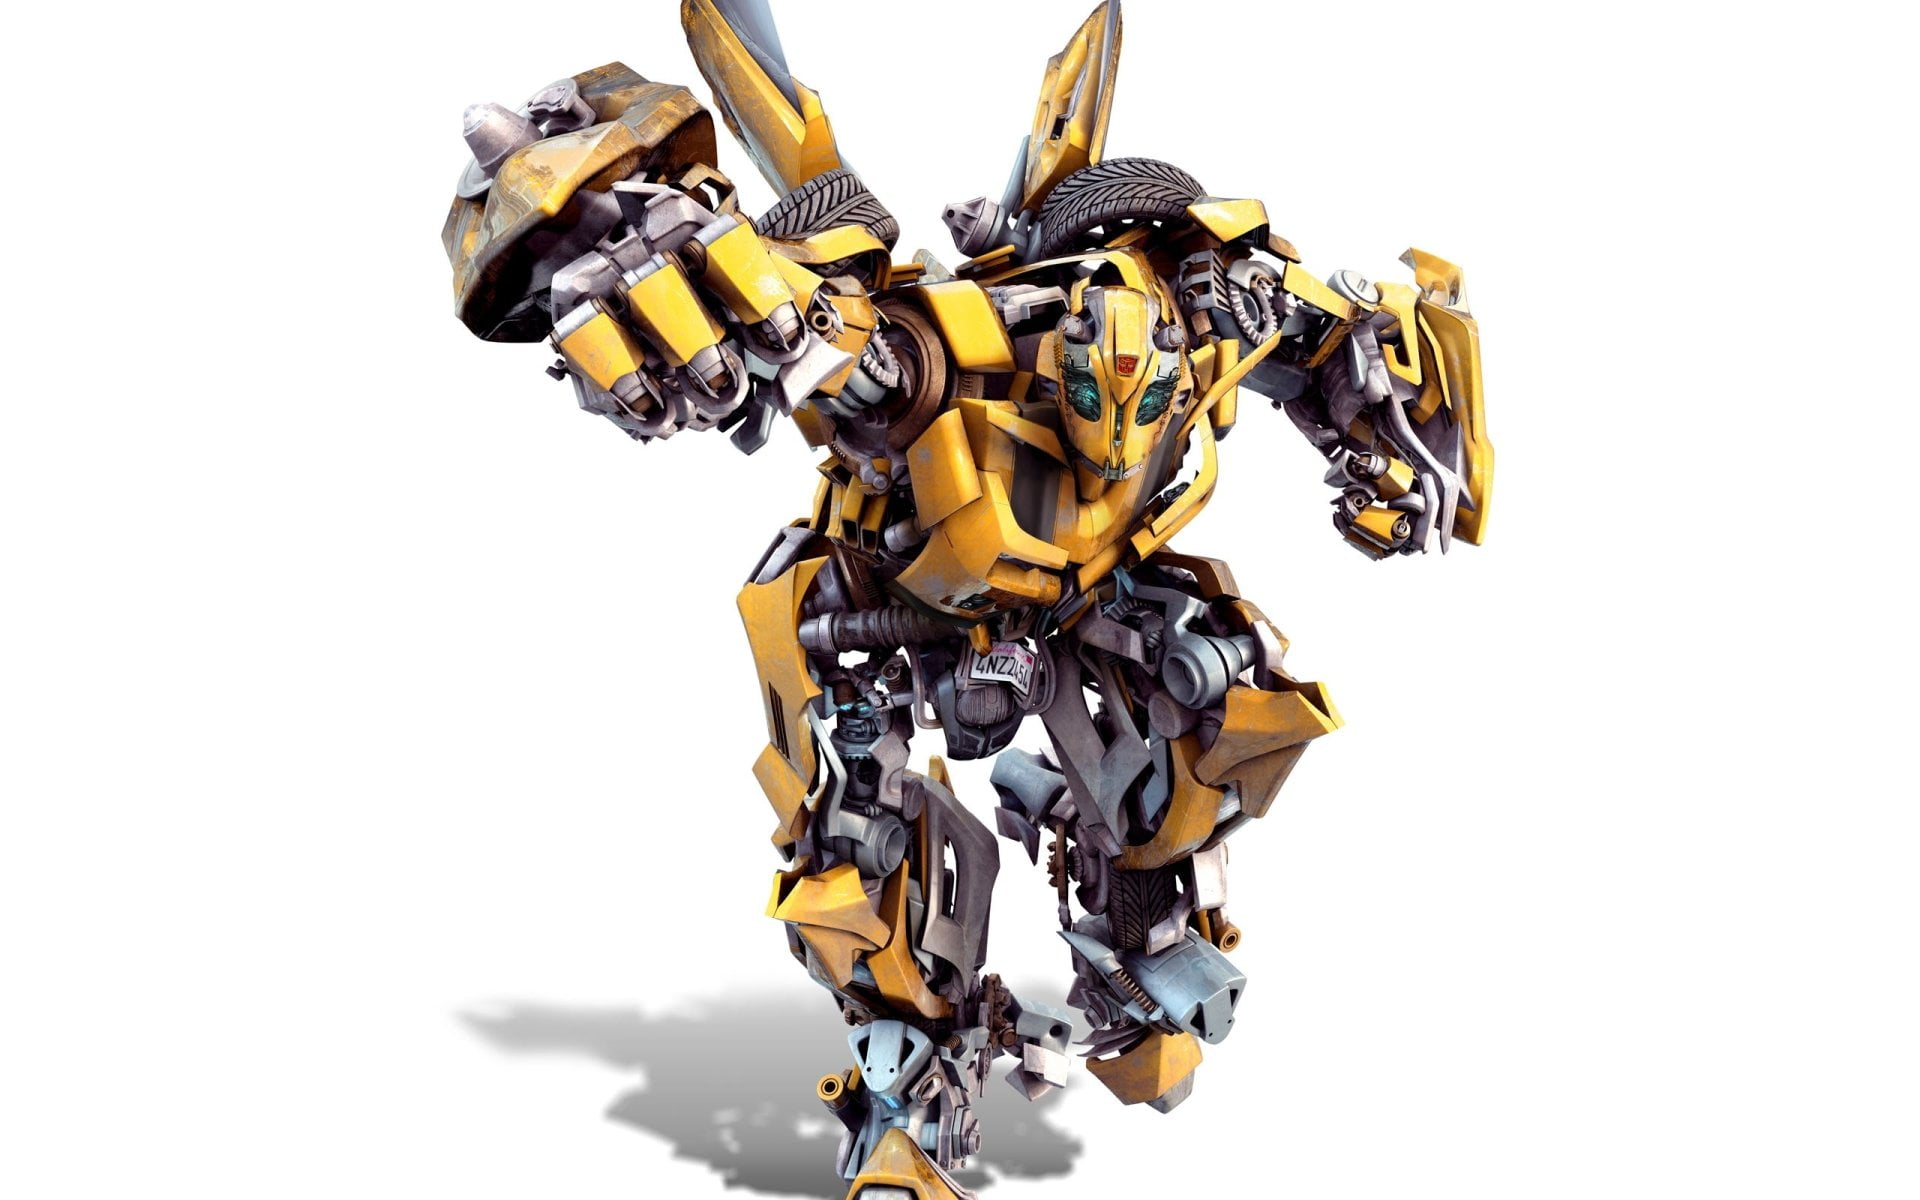 Transformers Bumble wallpaper, Bumblebee (Transformers), white background